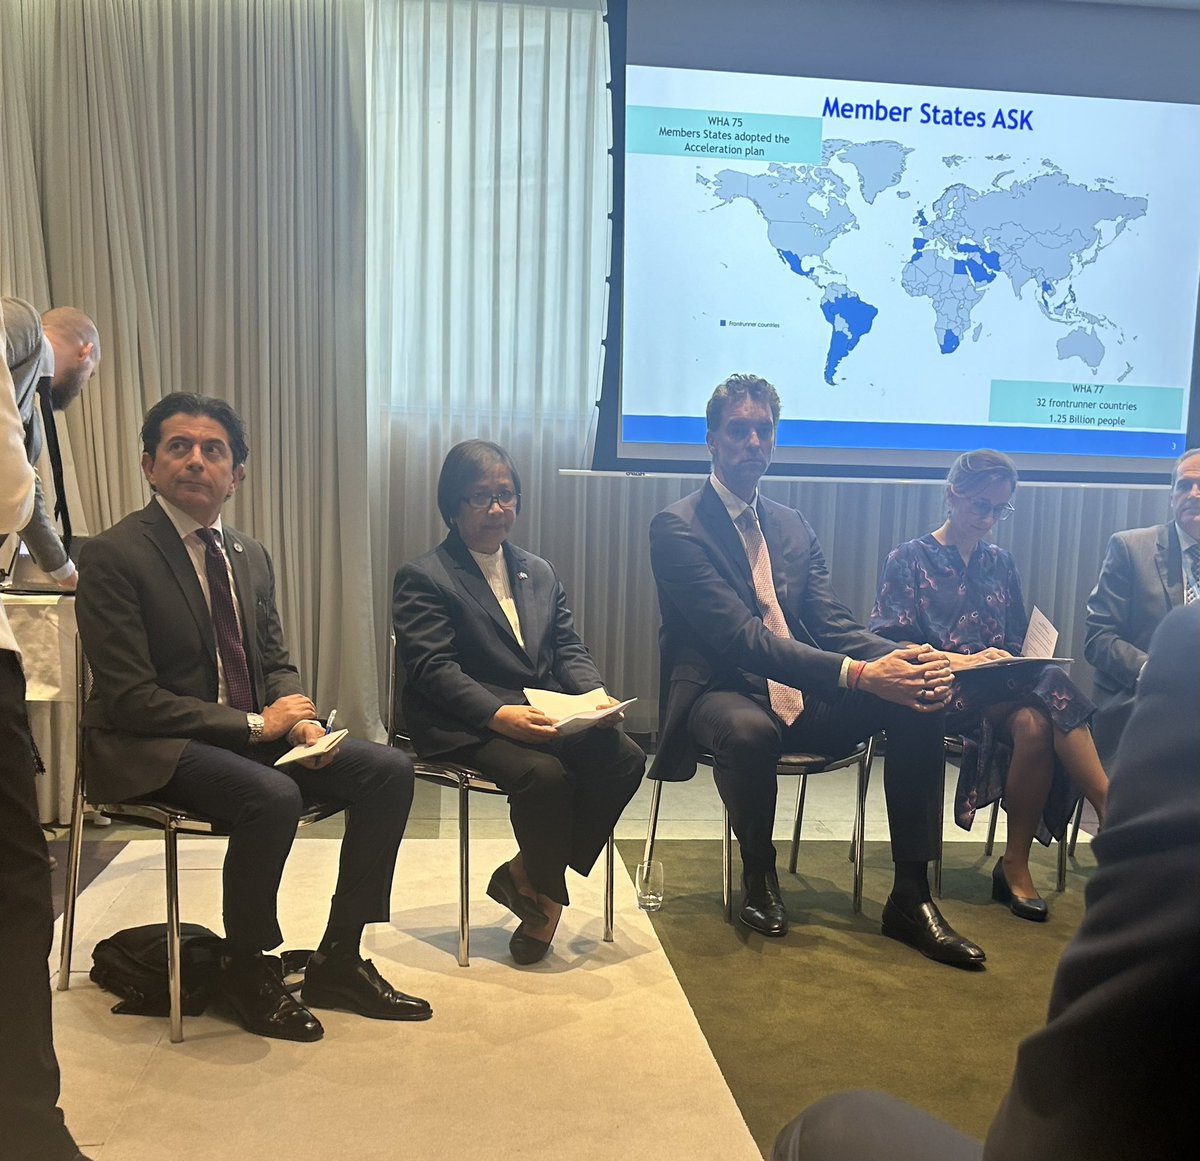 Thanks to Govt of #Spain and #Jordan hosting #obesity and @WHO #Accelerationplan event at #WHA77 w. @PauGasol @Worldobesity près-elect @SBarquera & @CurvyVickiM. And bravo Spain as newest front runner country!